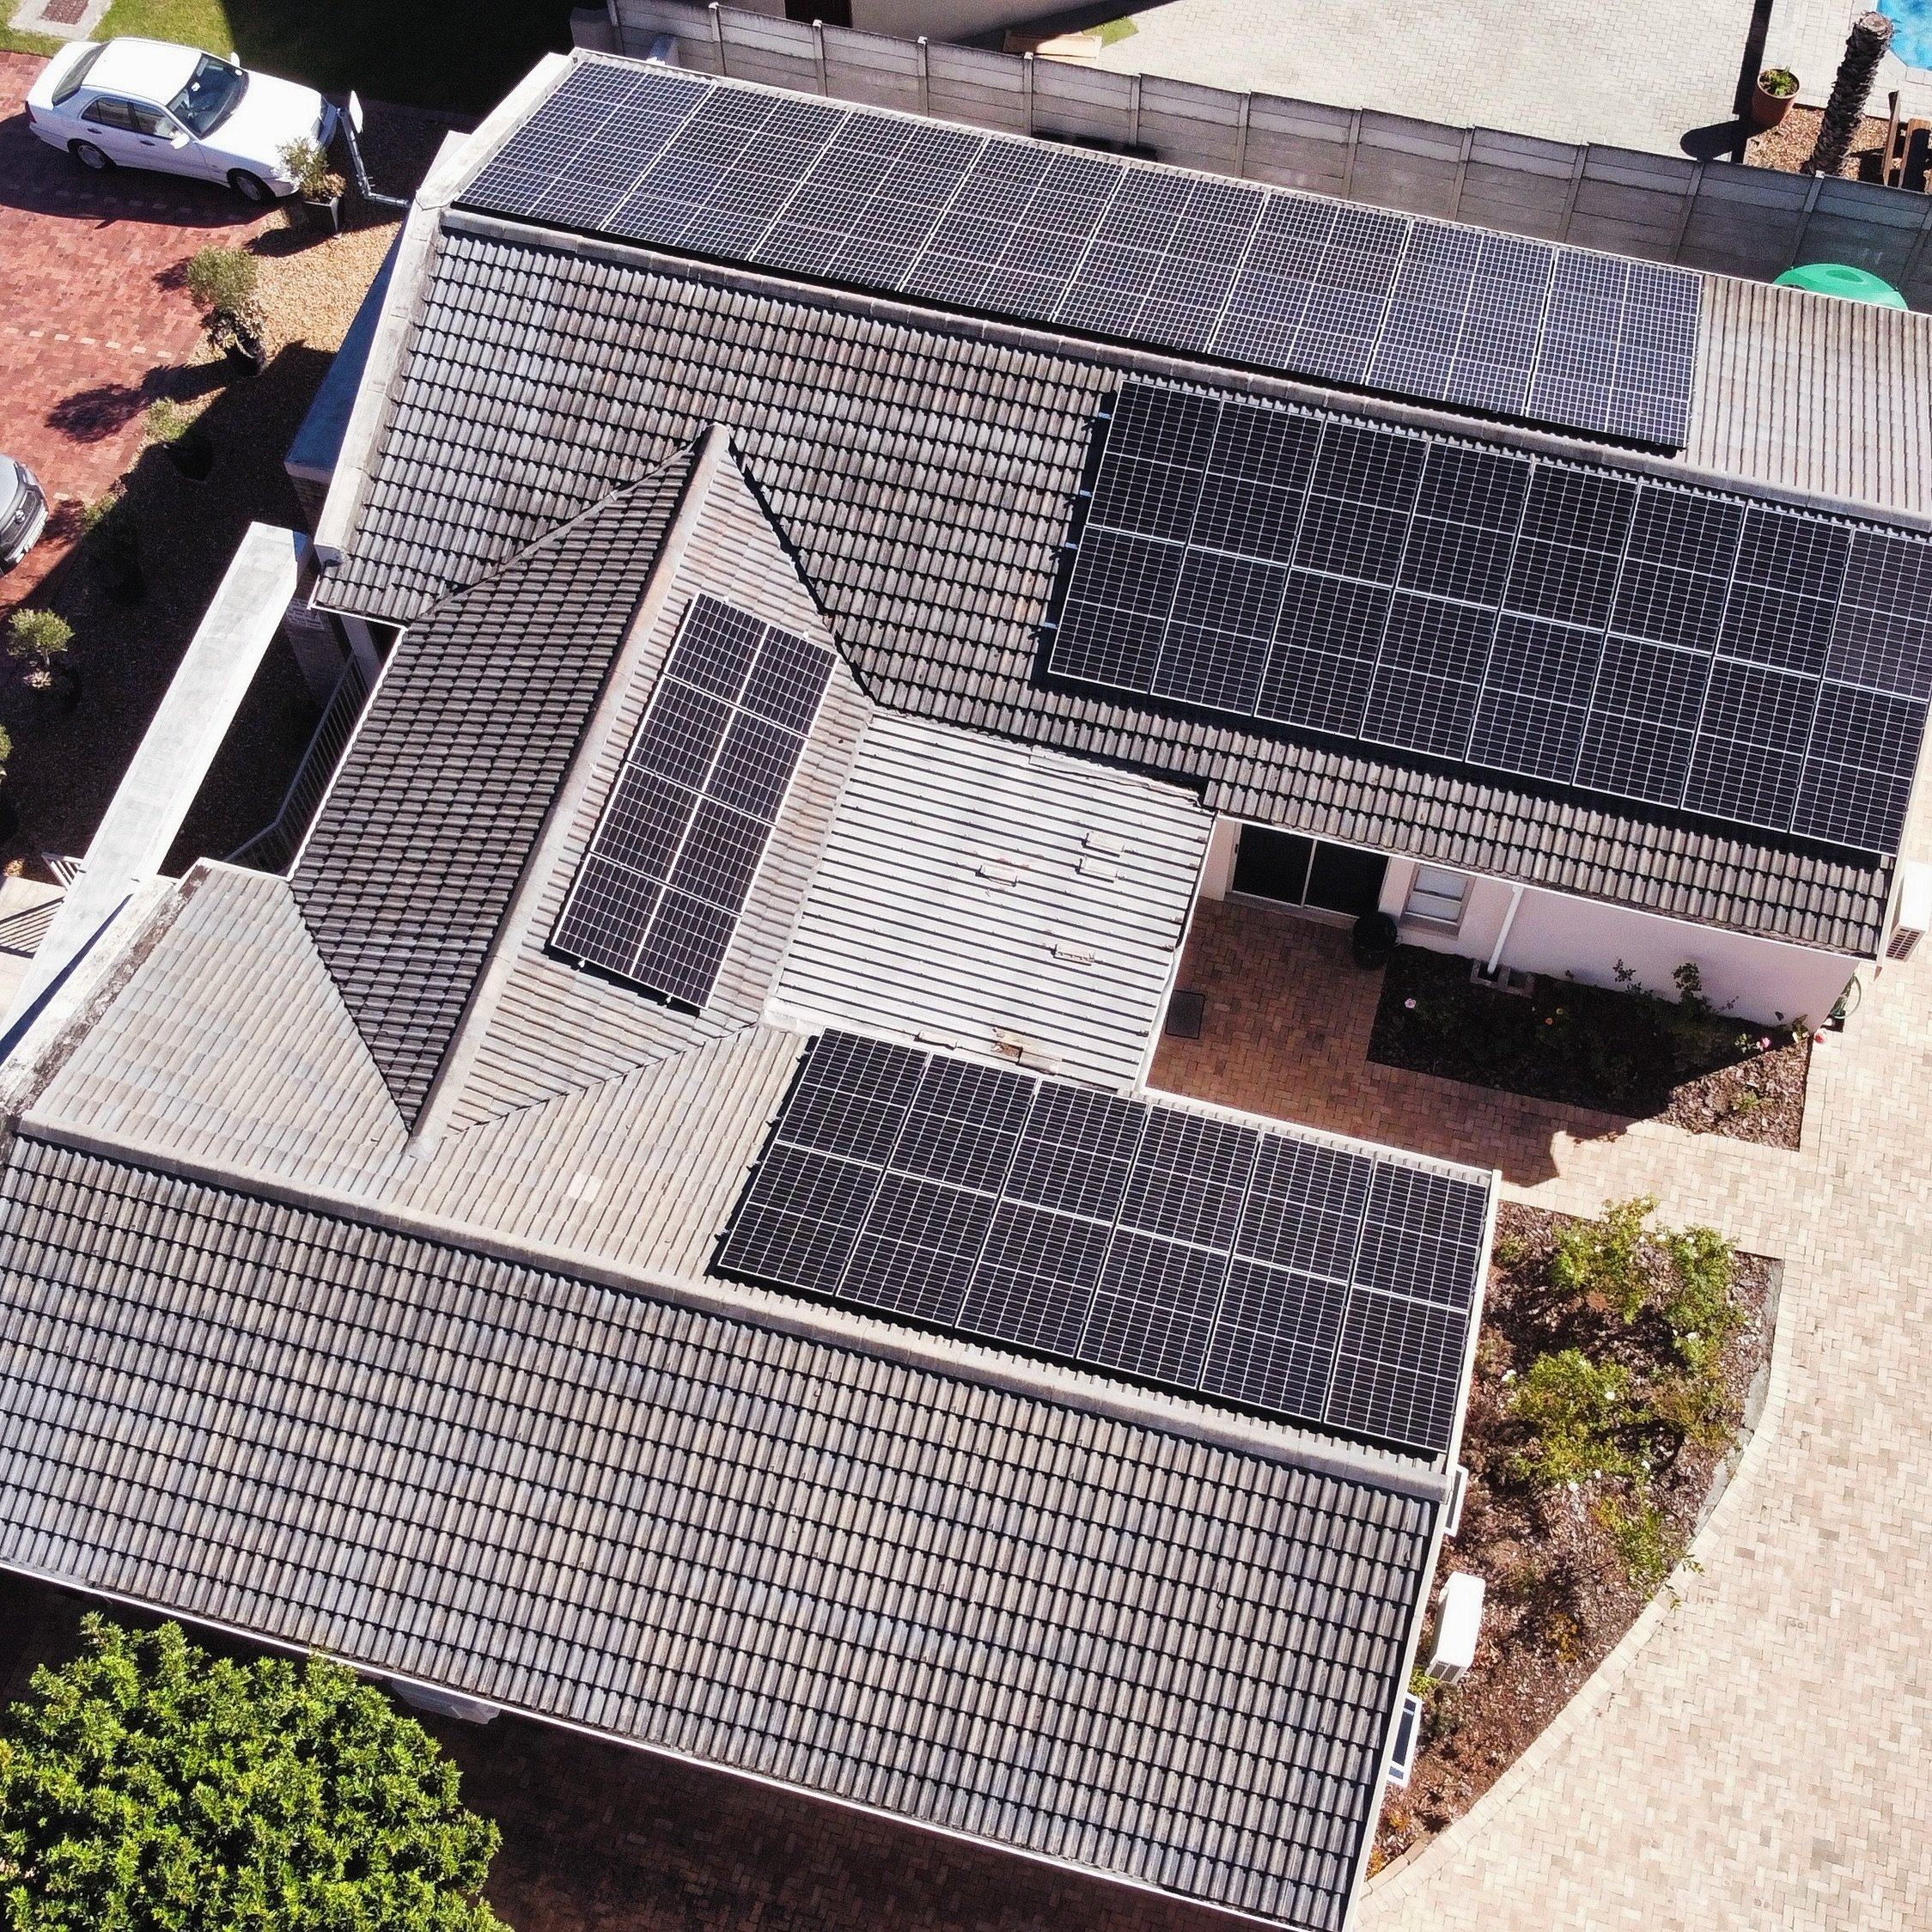 Thanks to our Mediterranean climate in #capetown , with very mild, rainy winters and warm to hot, sunny summers, solar PV systems perform well all year round.
This is an arial shot of our latest #victronenergy smart-solar system in the northern subur